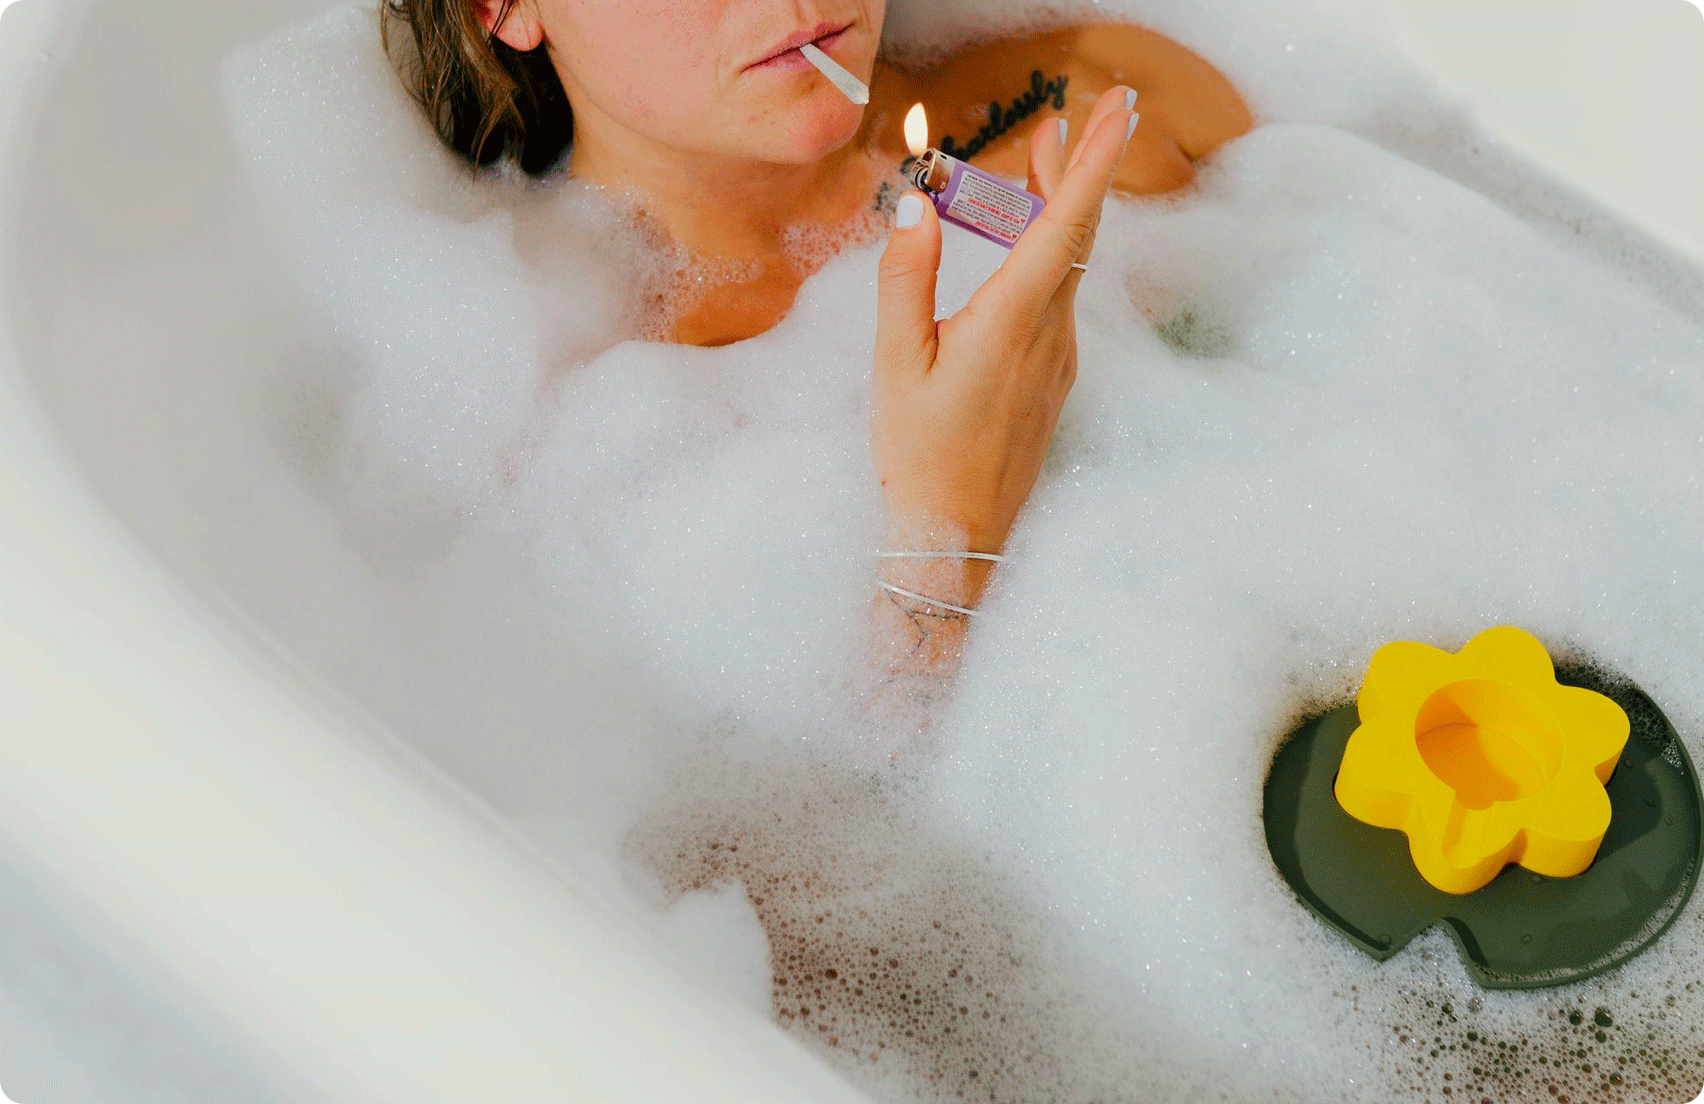 Human lighting joint with yellow Floating Ashtray in bath